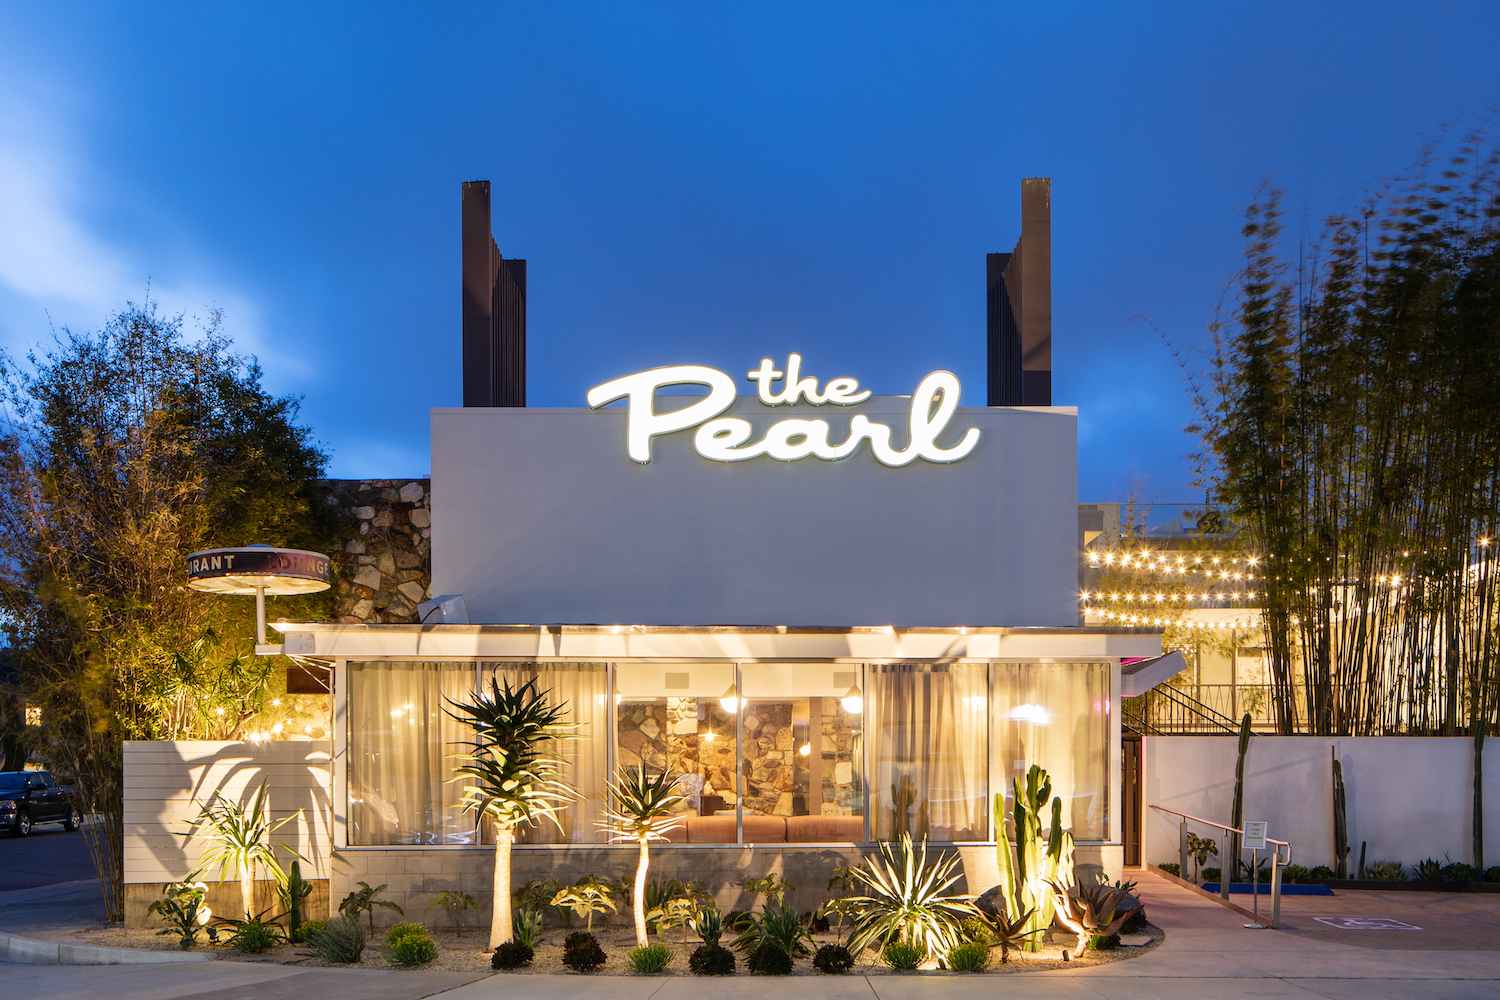 Exterior of San Diego's retro The Pearl Hotel located in Point Loma and home to a new restaurant concept called Ponyboy opening this year